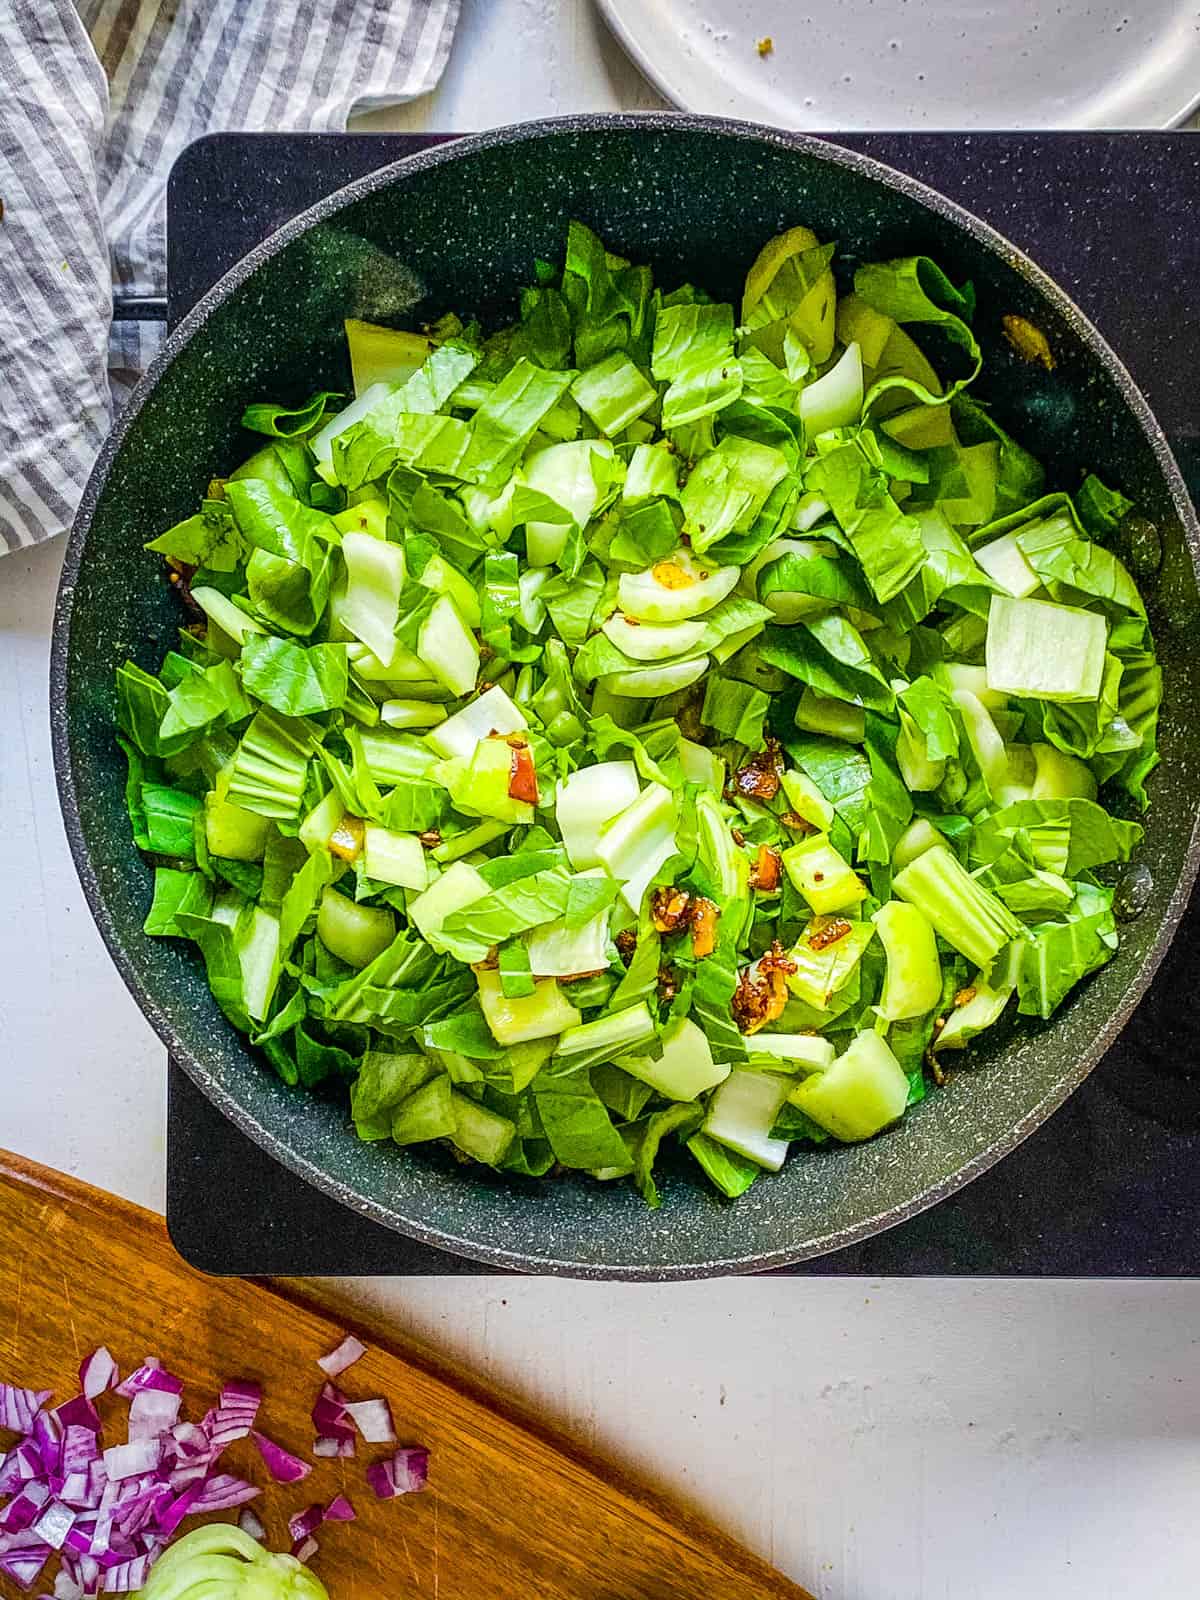 Bok choy cooking with Indian spices in a large skillet on the stove.